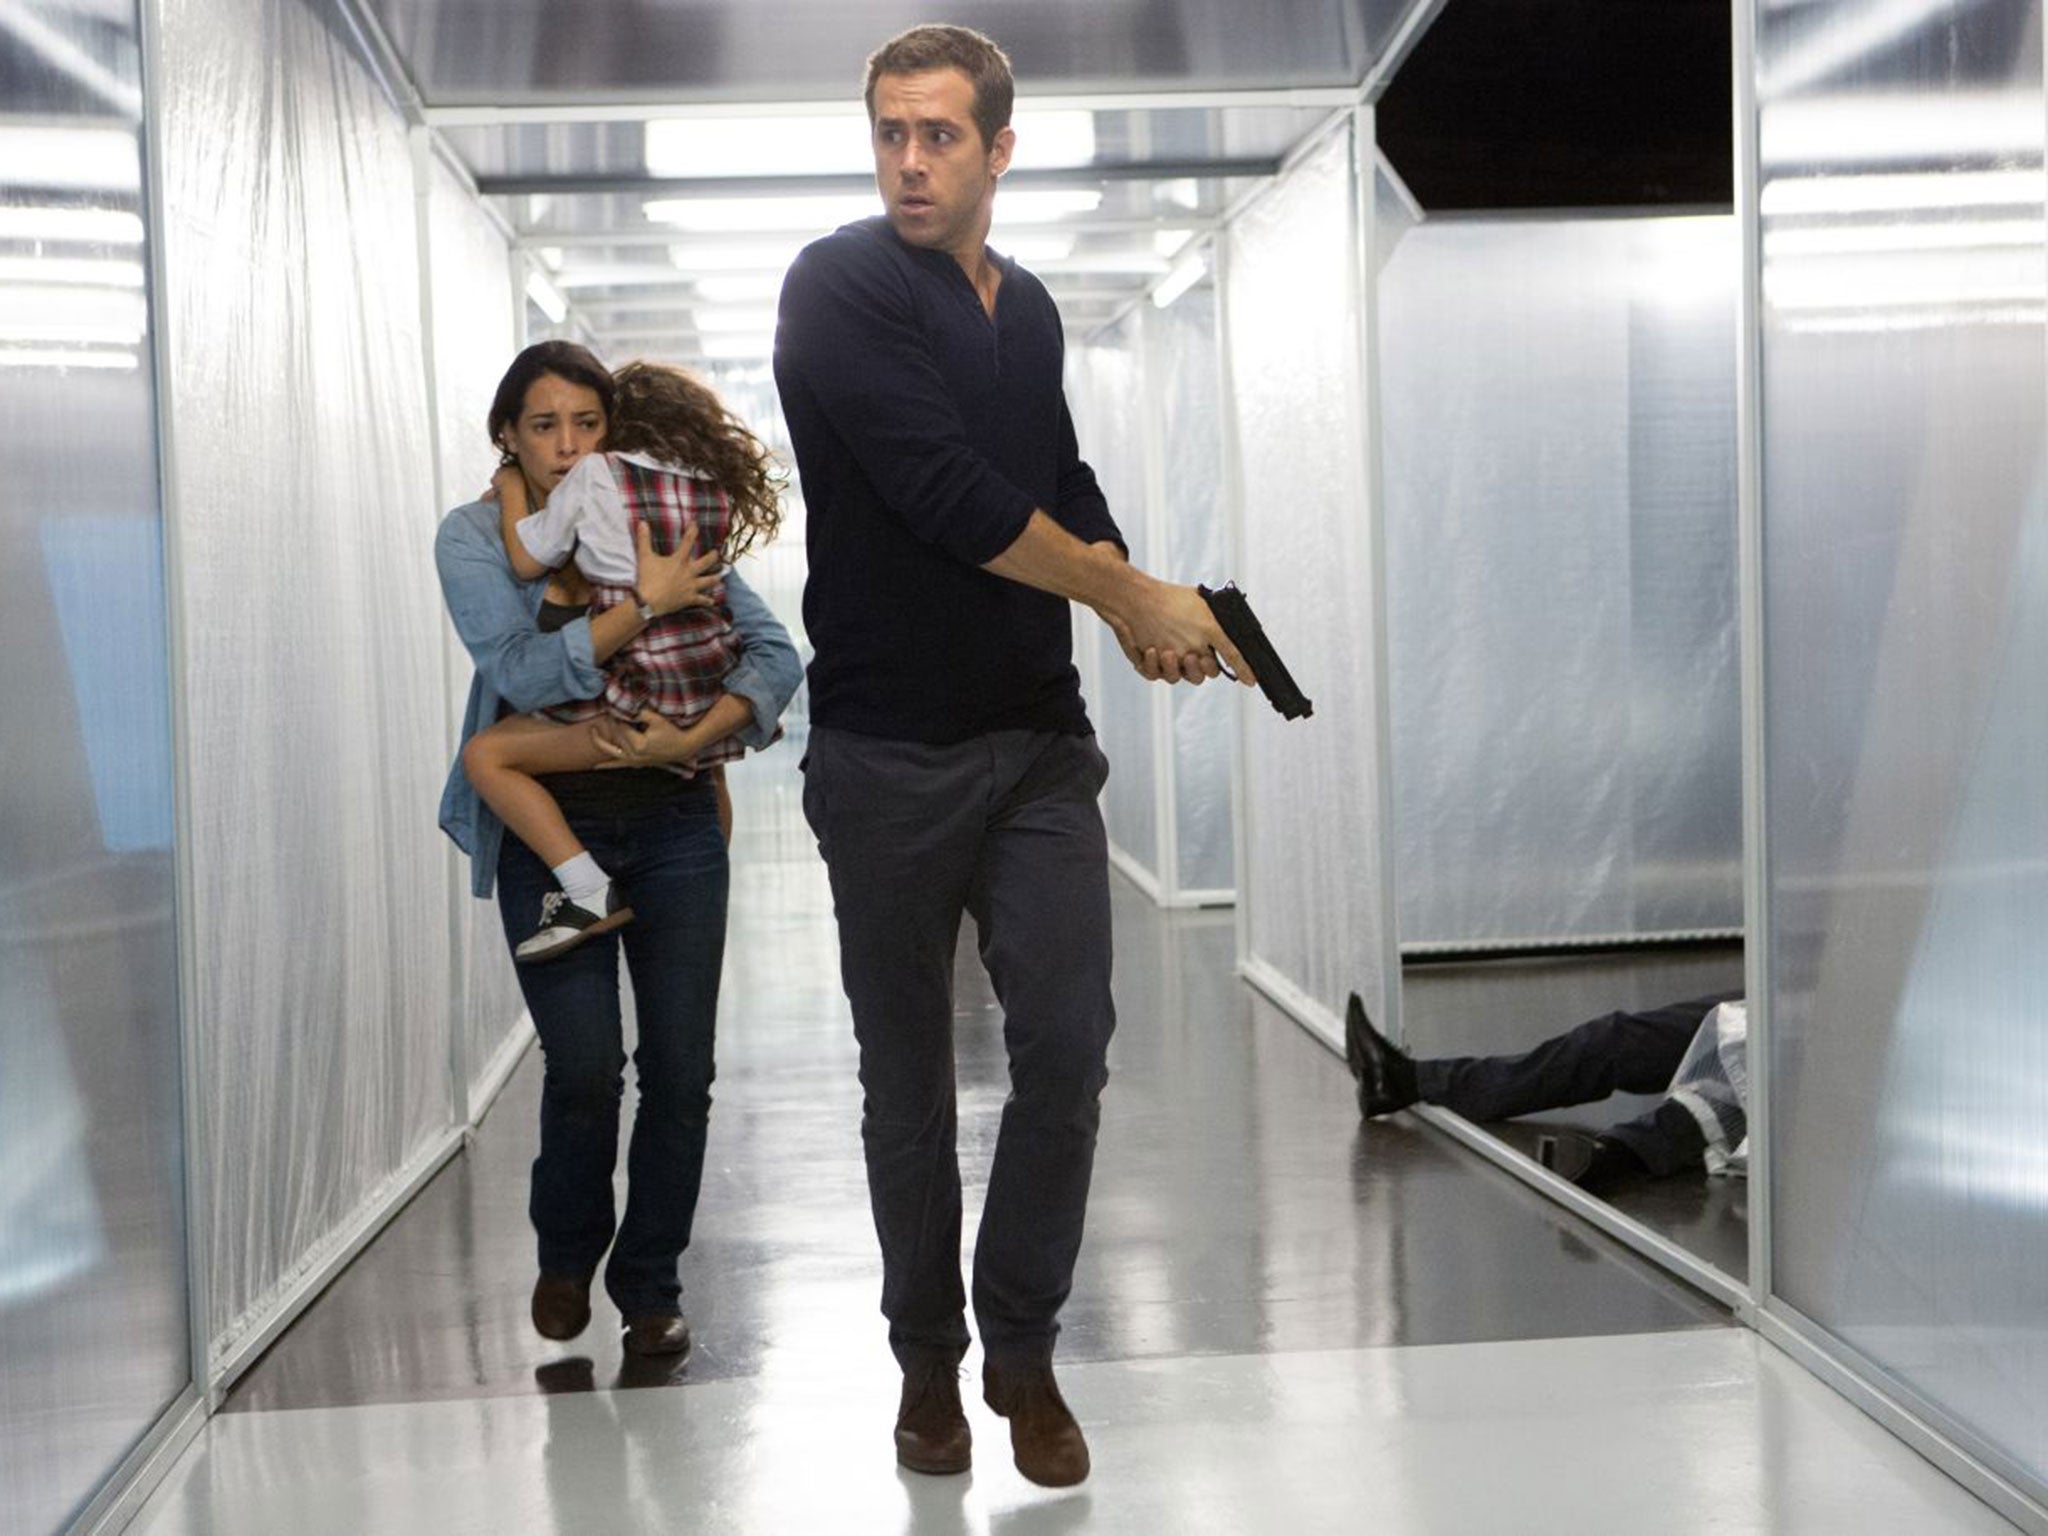 Madeline (Natalie Martinez) and daughter Anna (Jaynee-Lynne Kinchen) flee with Young Damian (Ryan Reynolds) in psychological science fiction thriller Self/less